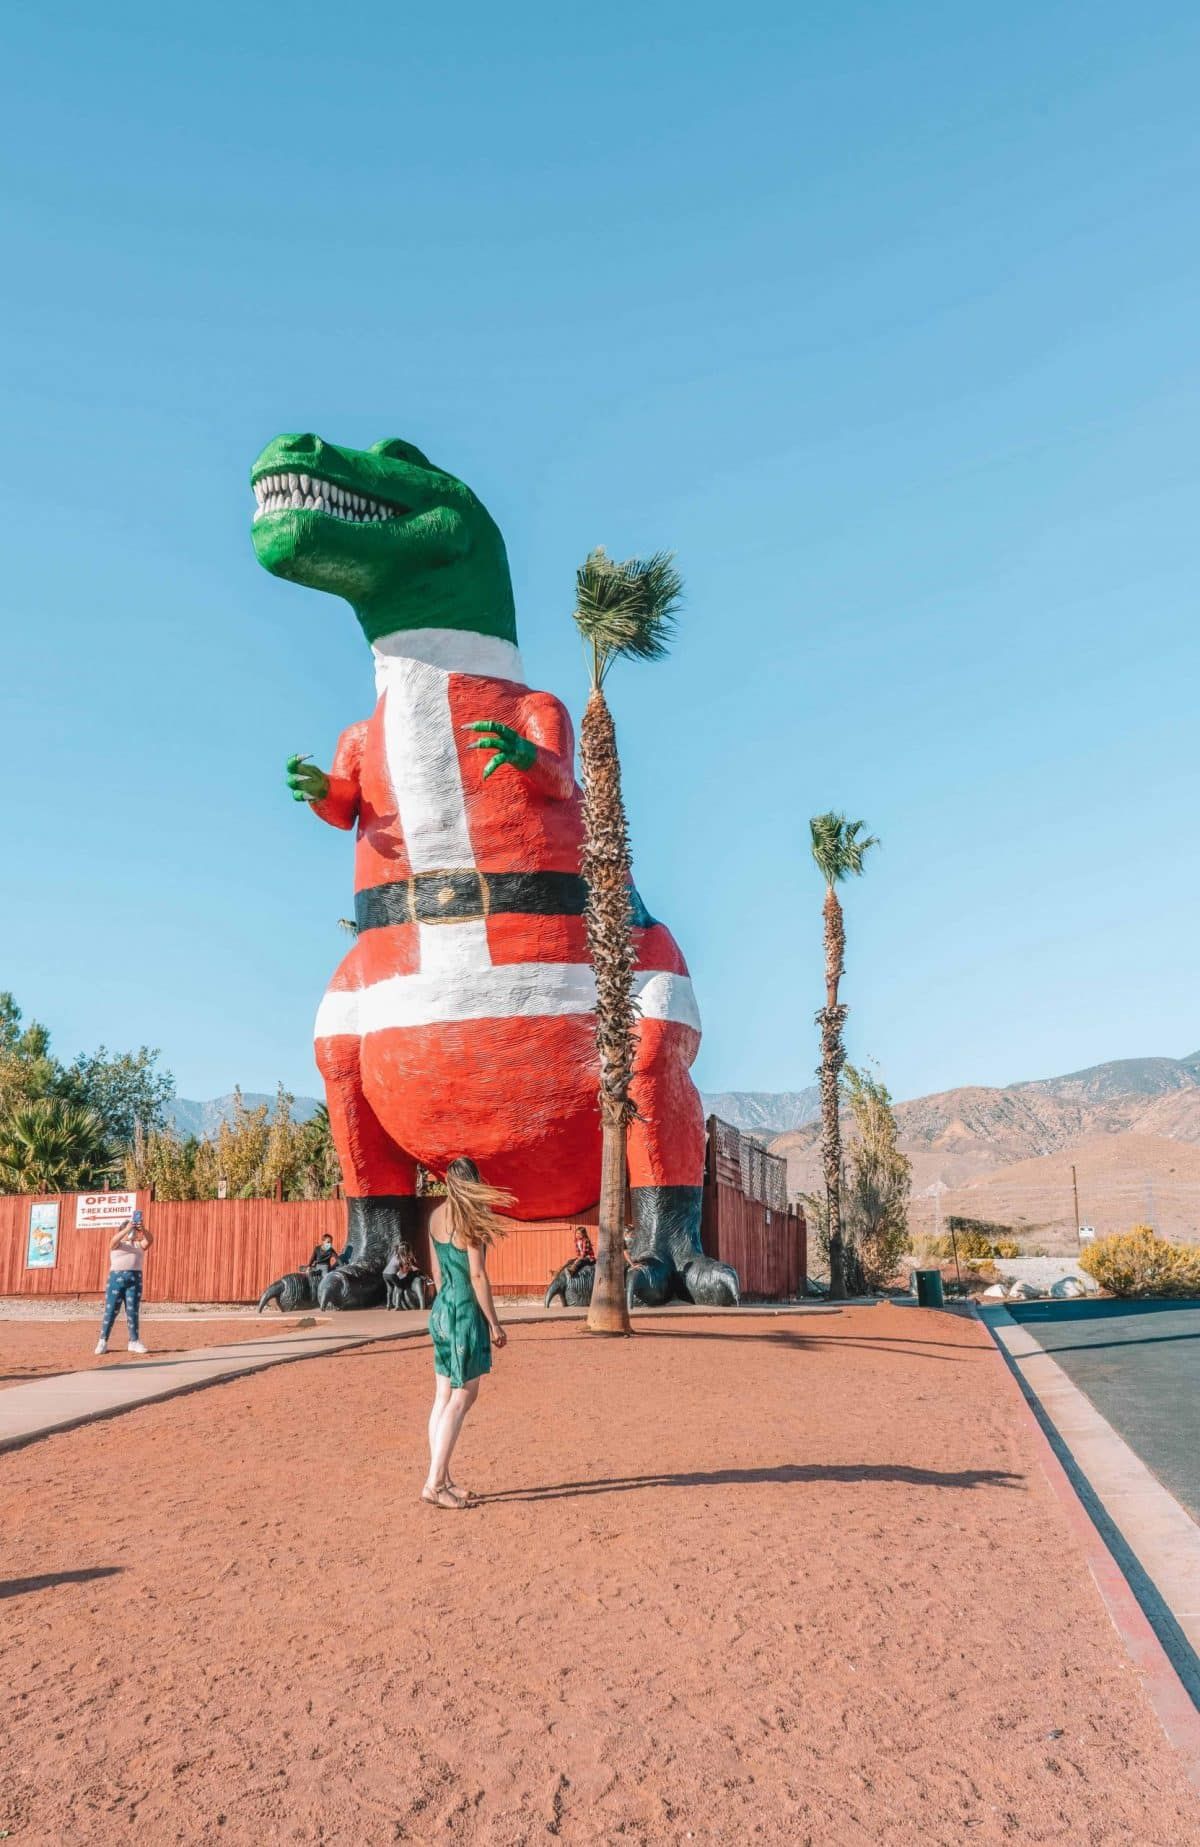 Cabazon dinosaurs roadside attraction near Palm Springs